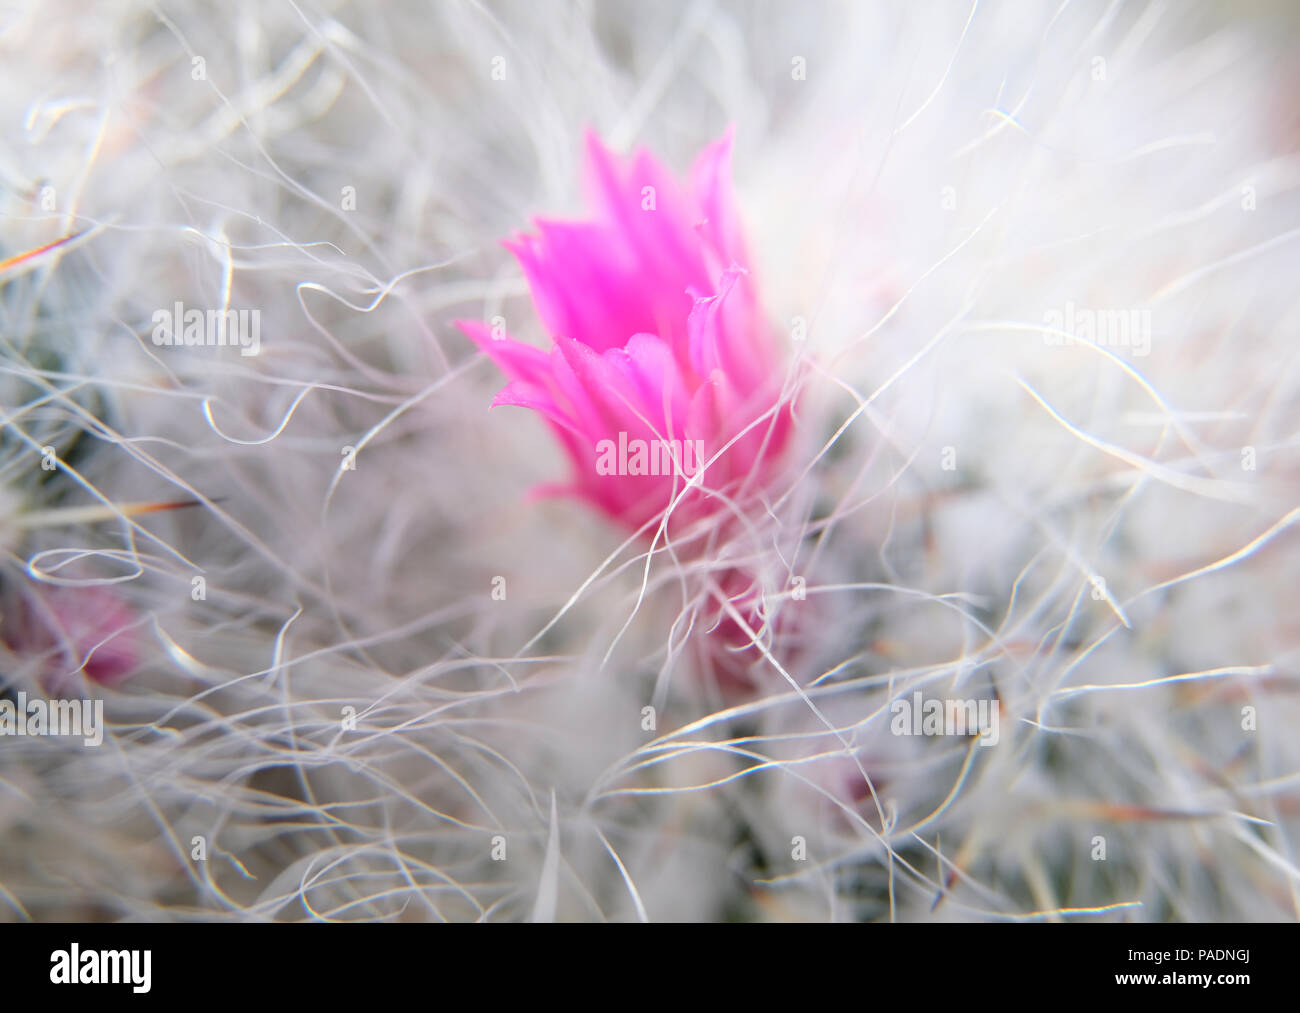 Tiny pink flowers in bloom on Cactus pups Stock Photo